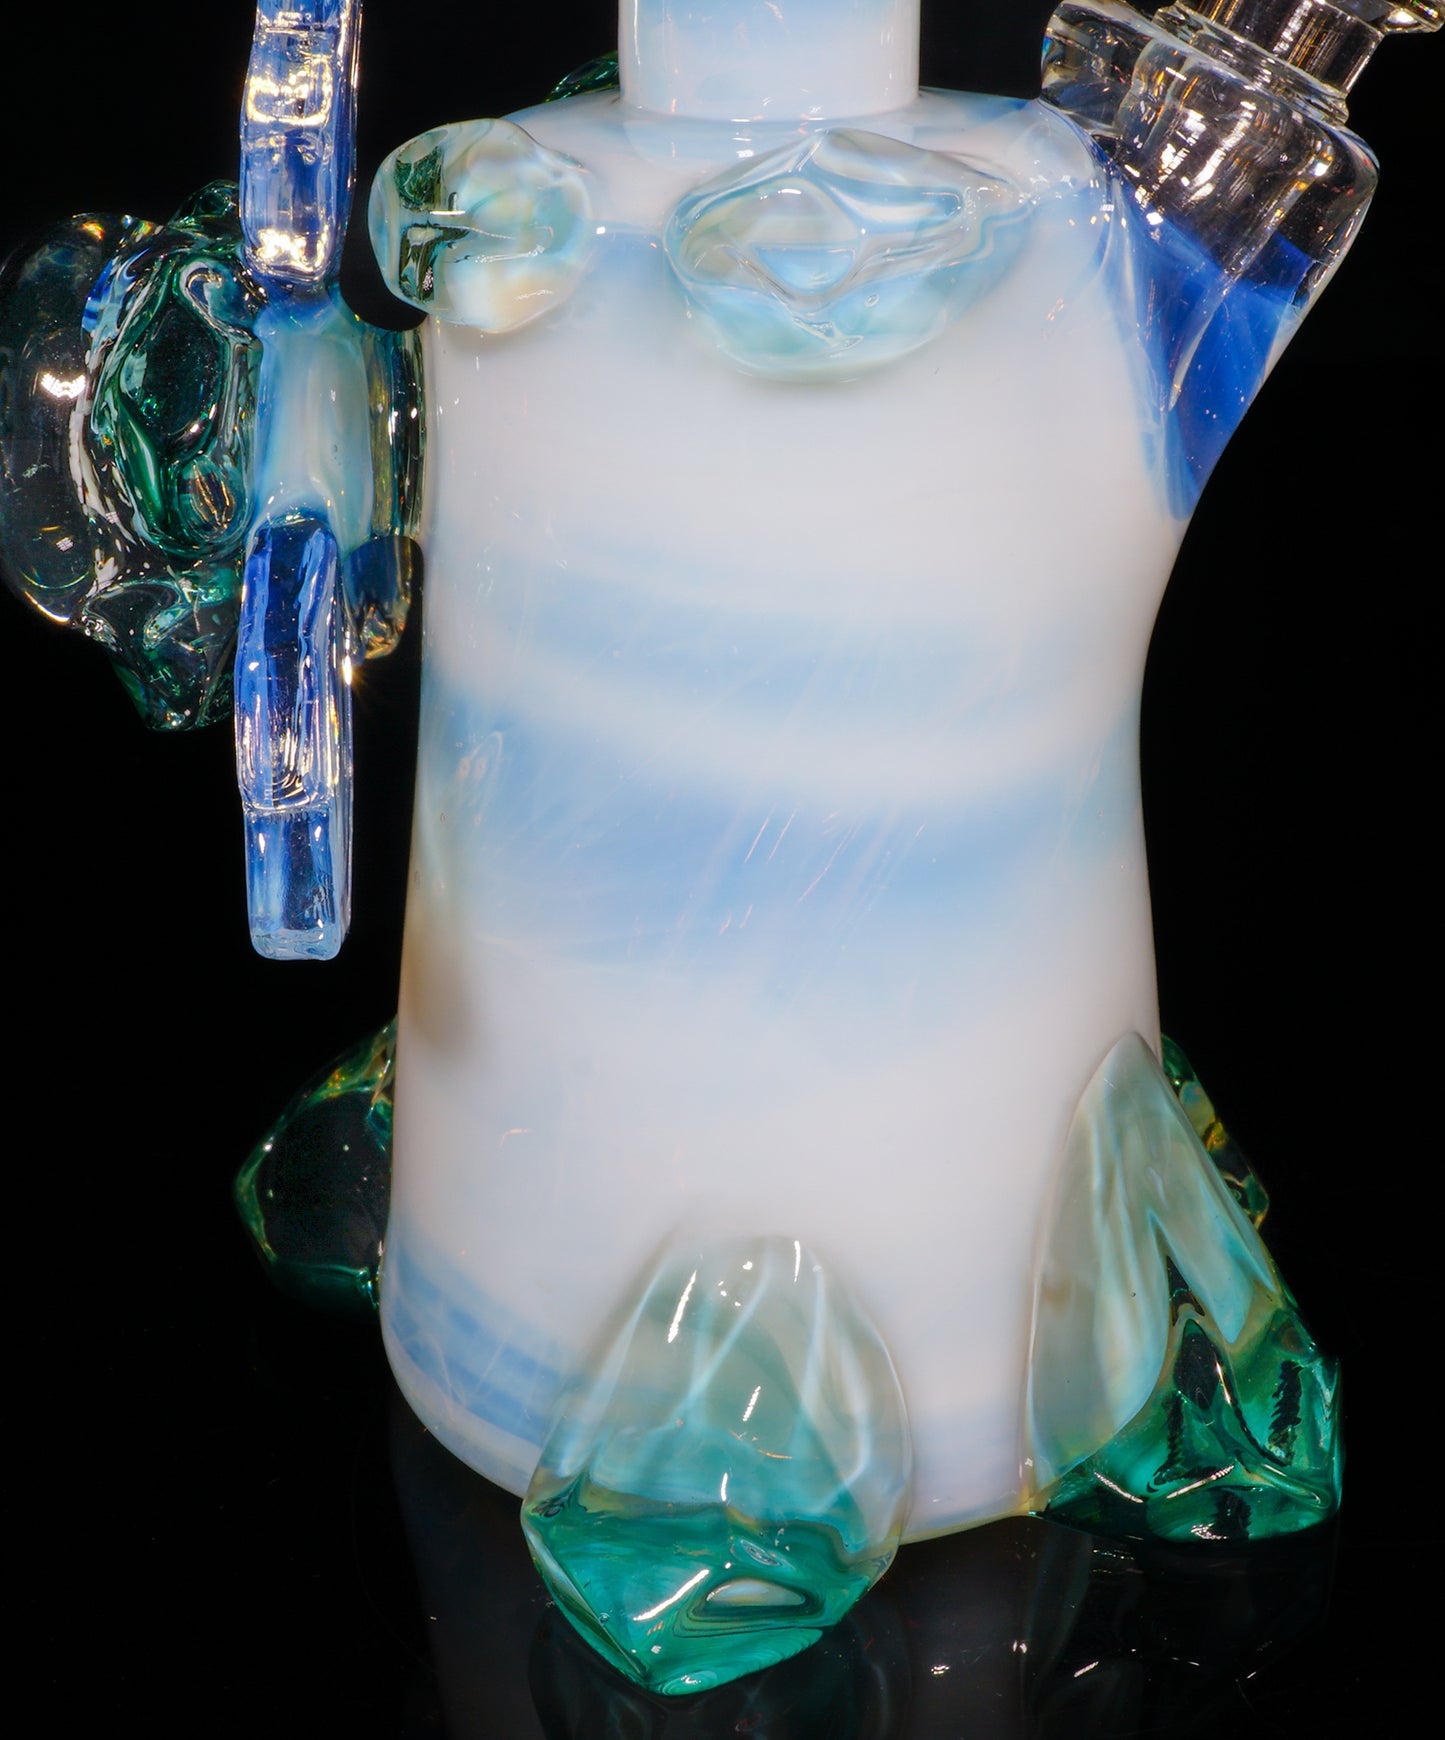 Glacier Tech Rig with Ice Cave Mouthpiece